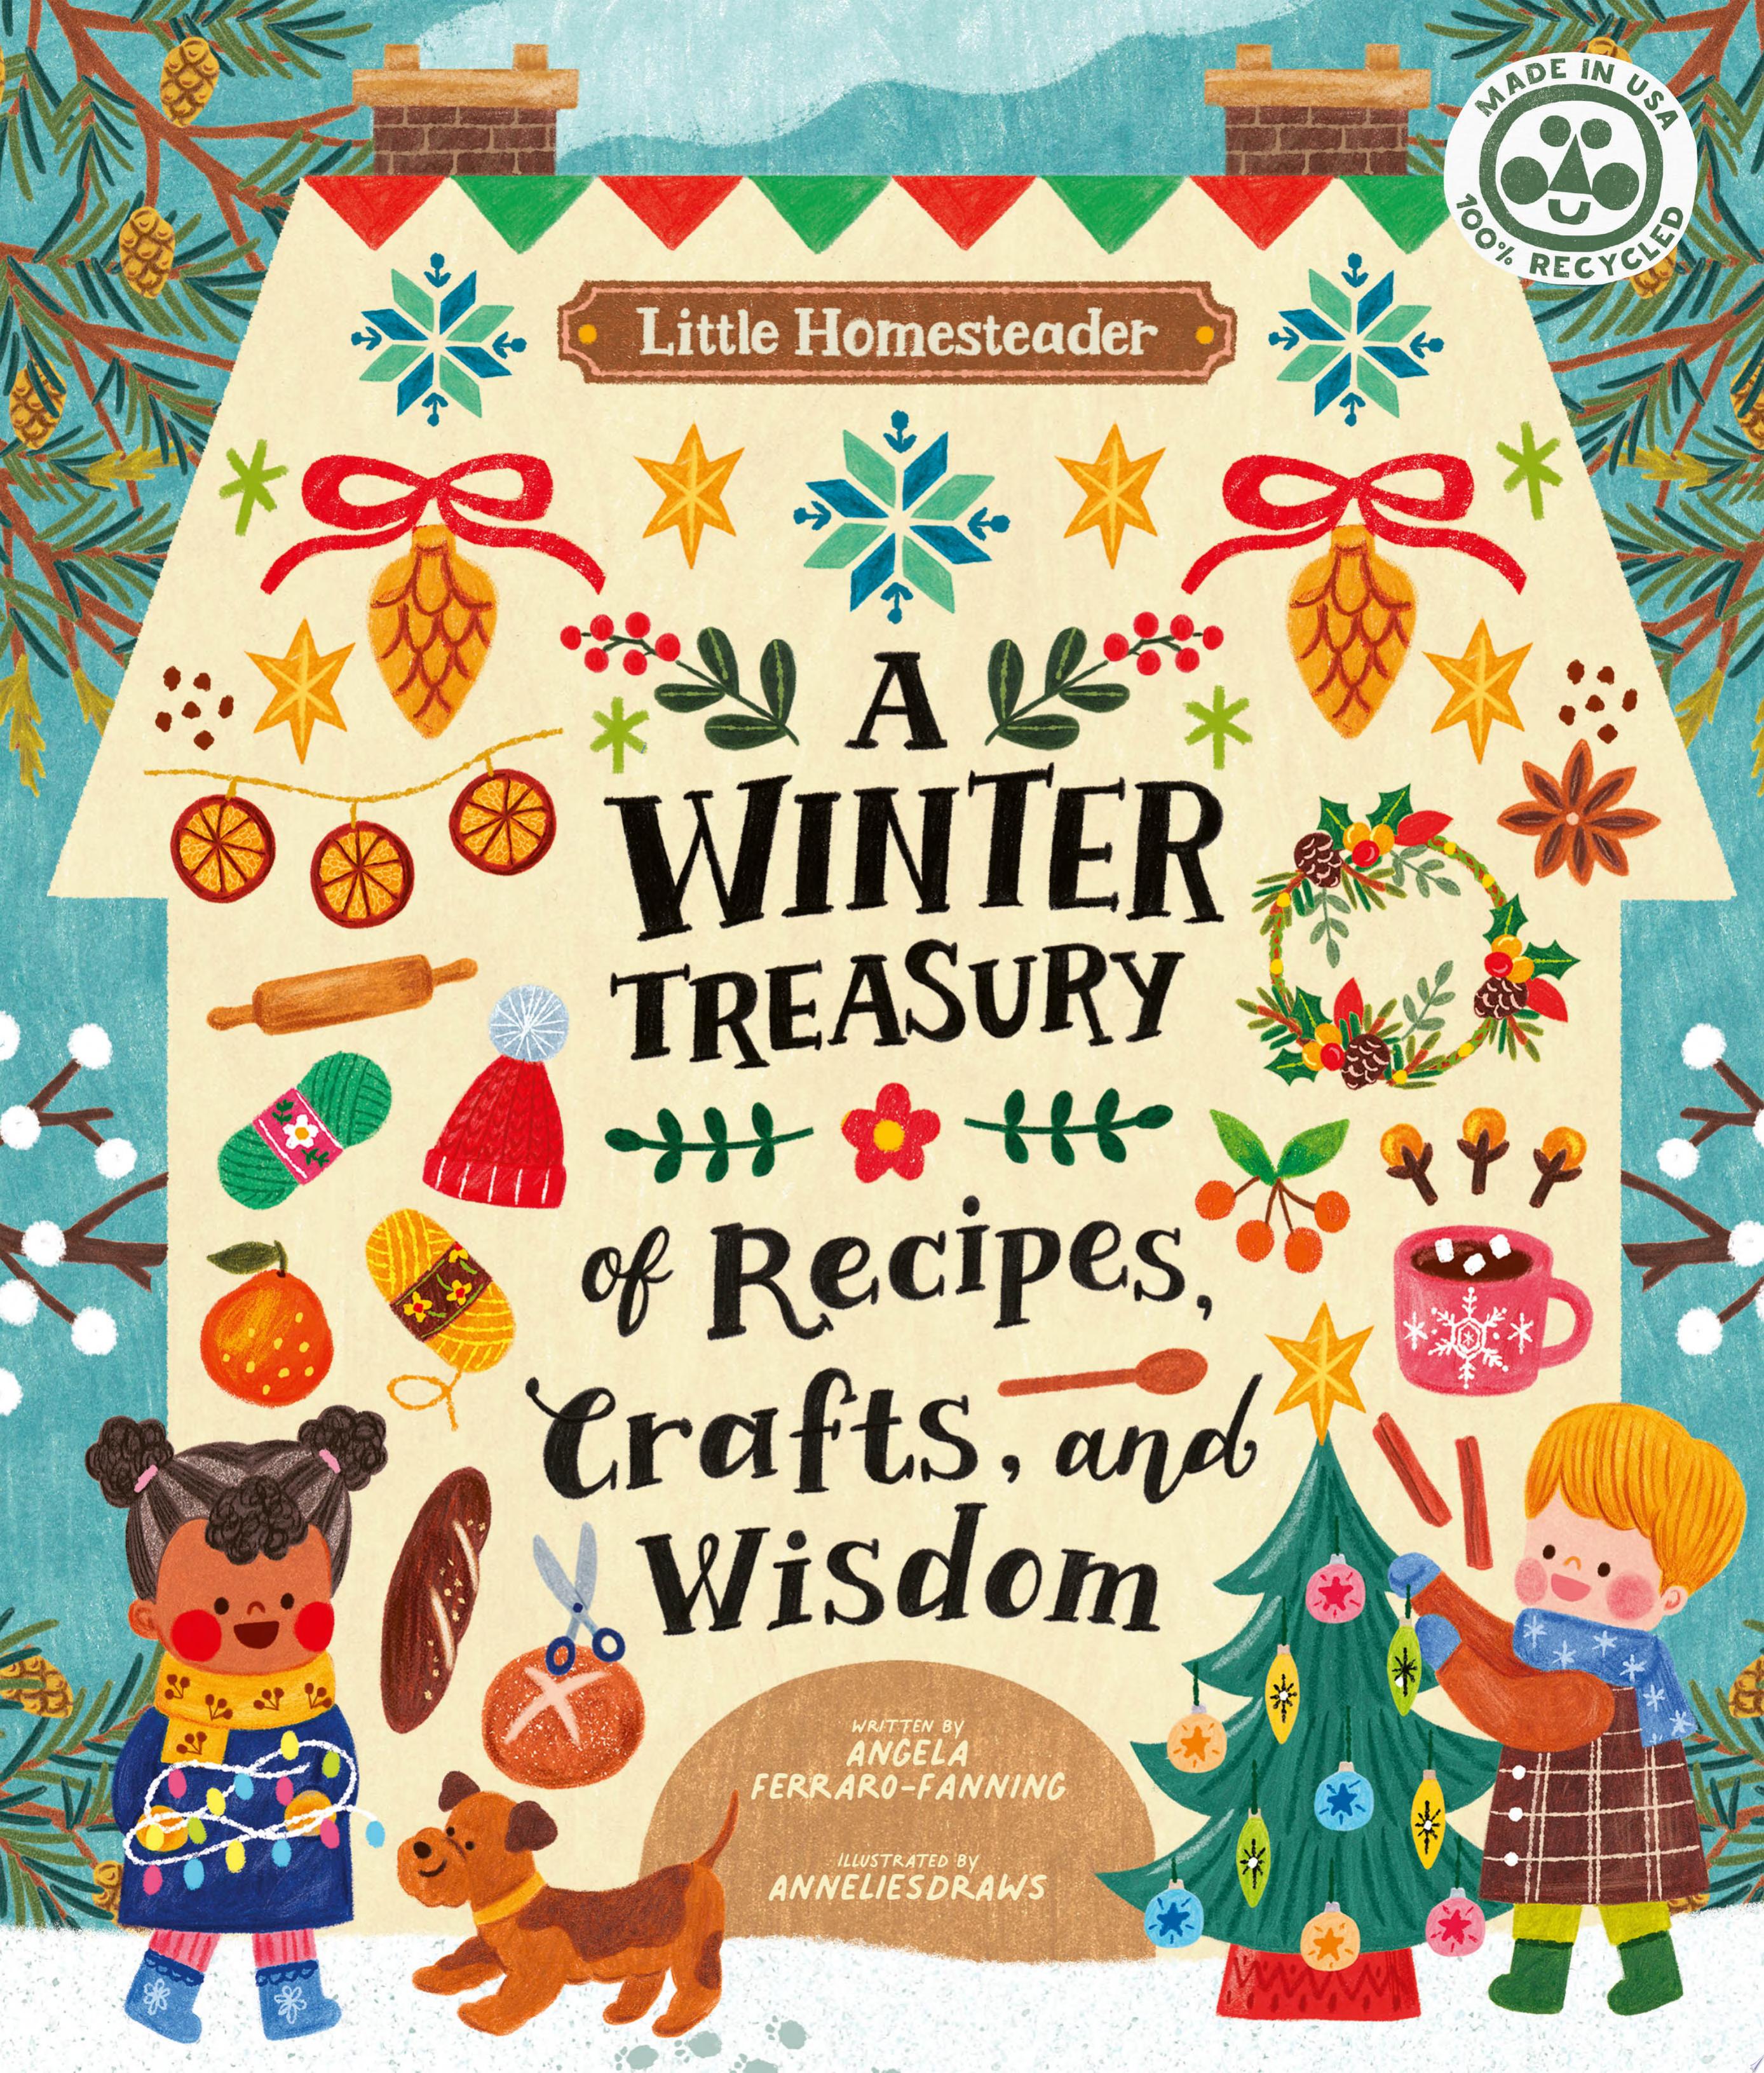 Image for "Little Homesteader: A Winter Treasury of Recipes, Crafts and Wisdom"